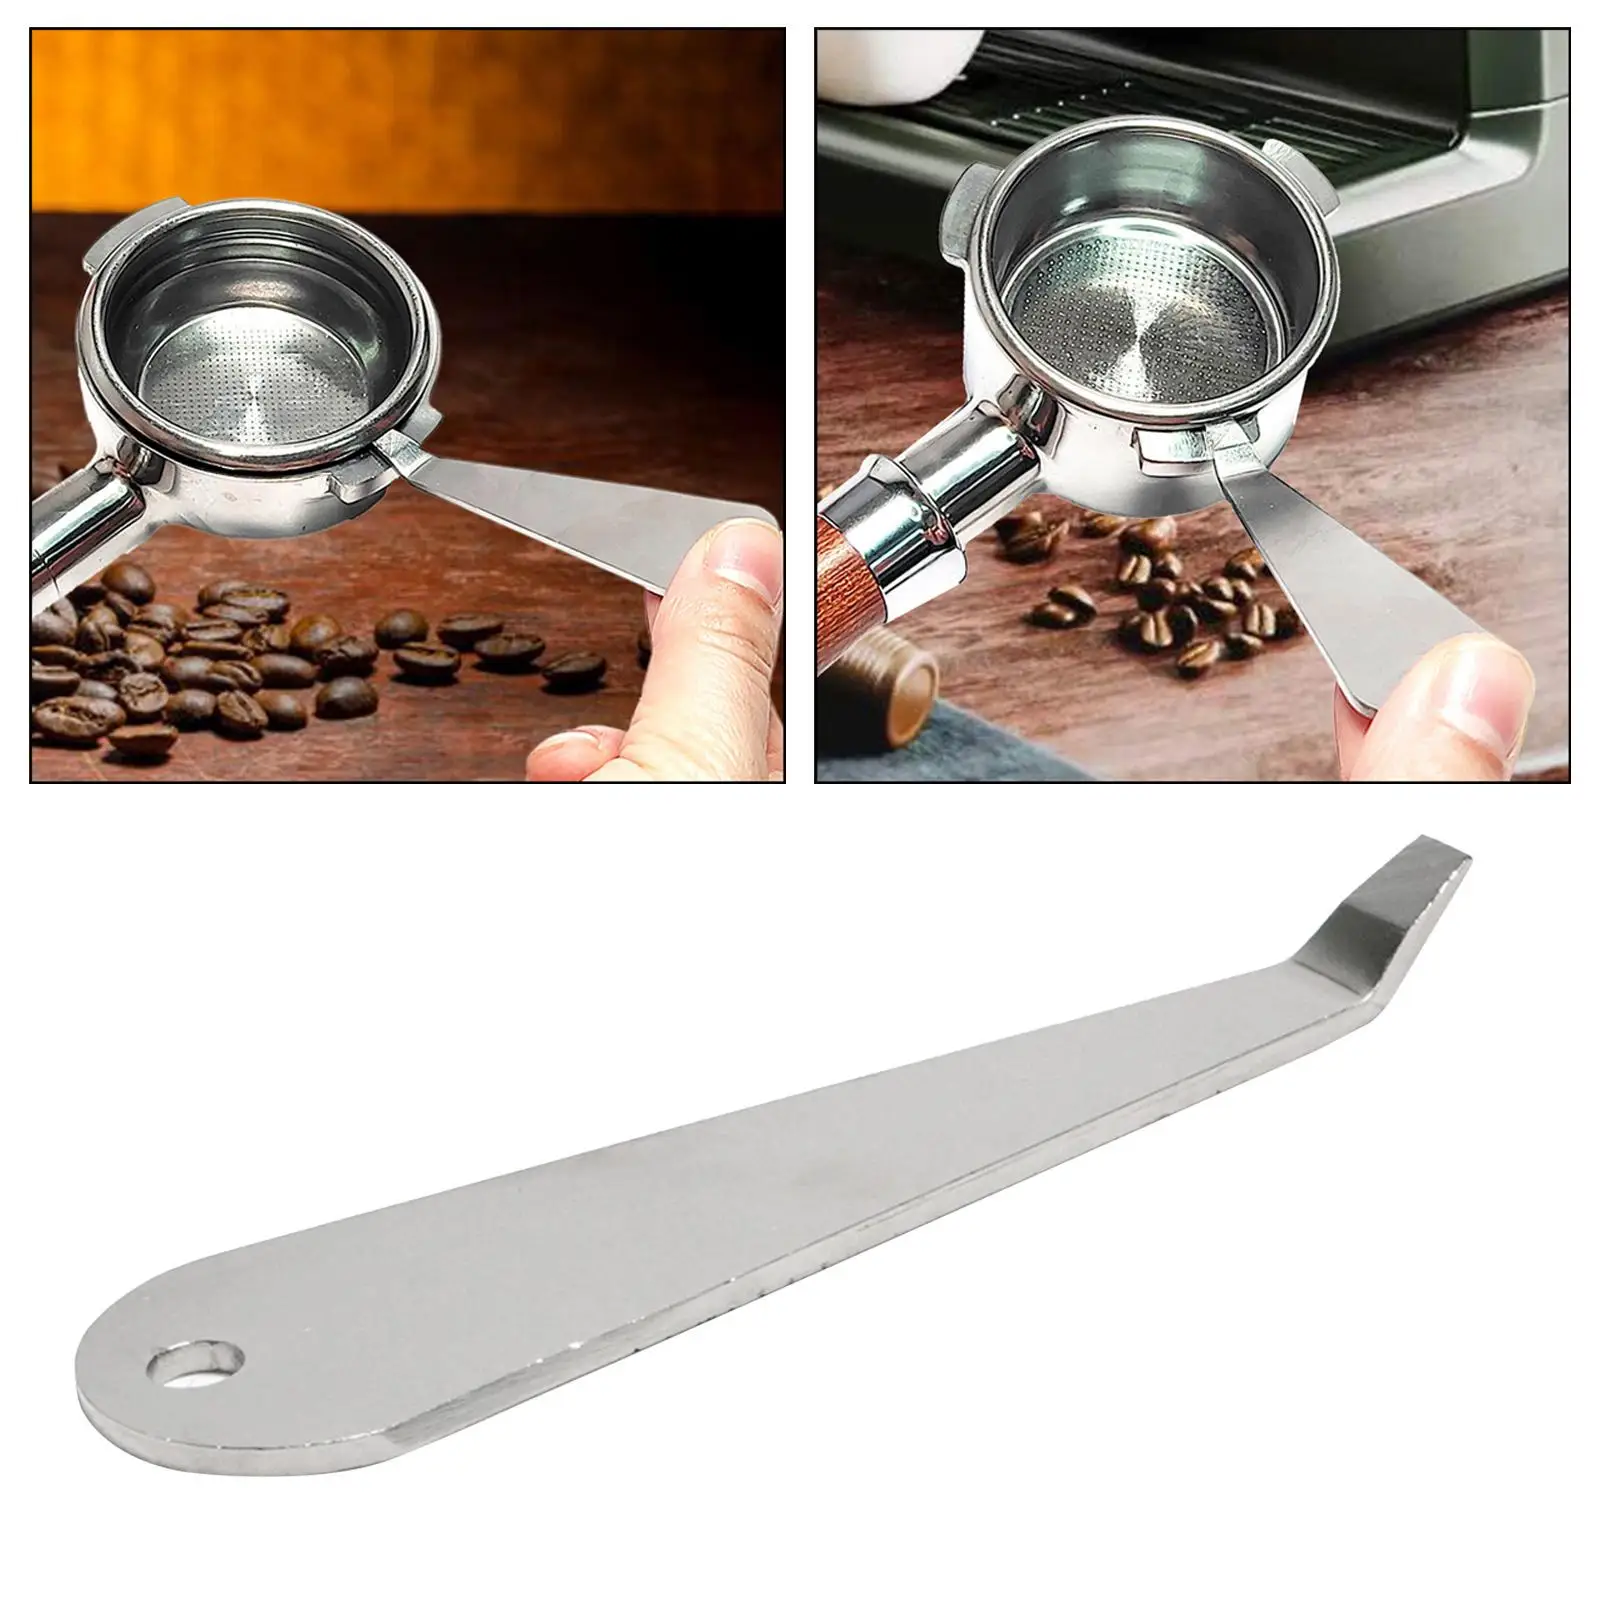 Coffee Portafilter Remover Coffee Tool, Cleaning Prying Tool, Stainless Steel Durable Portafilter Basket Removal Tool,